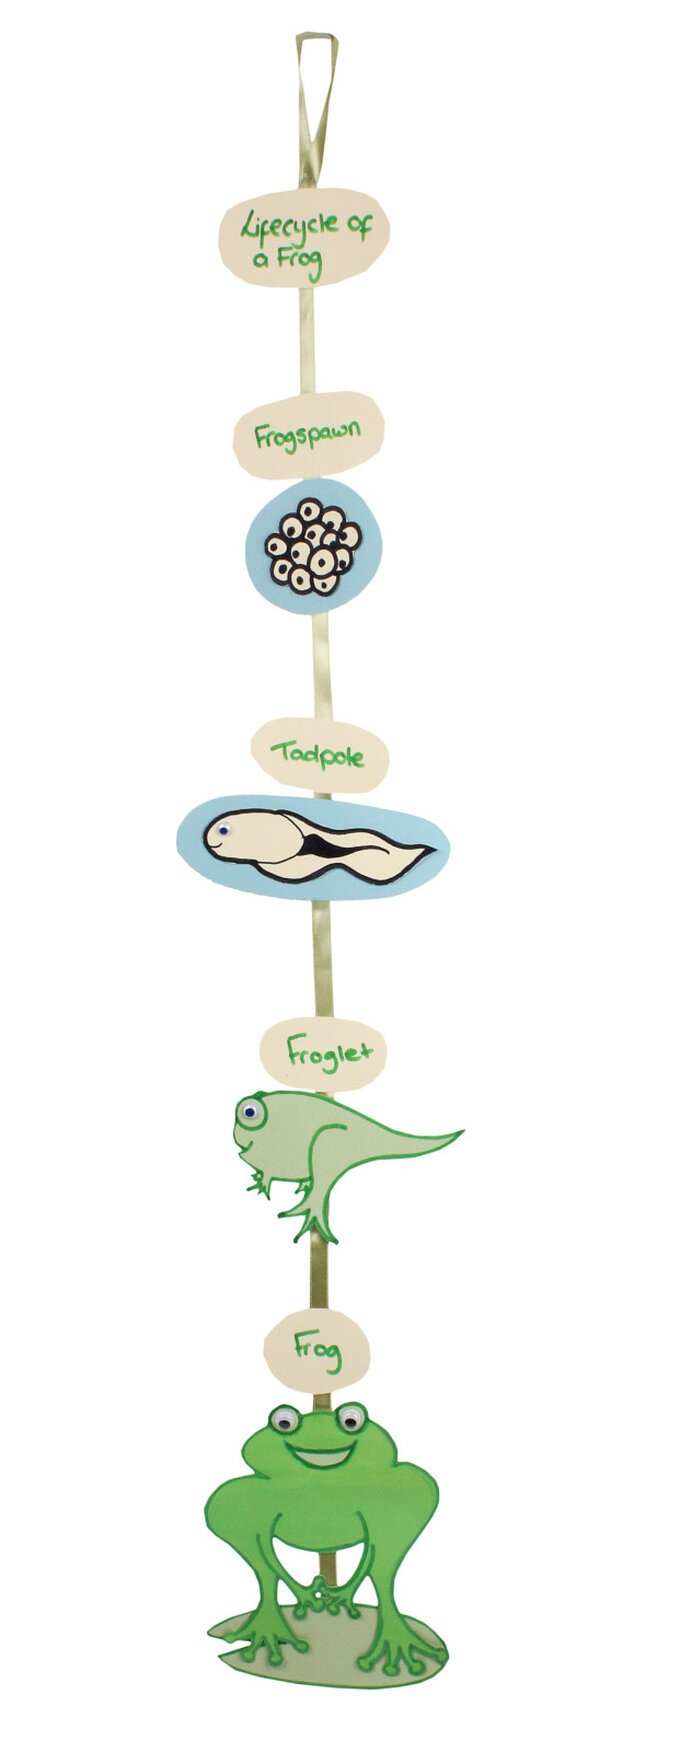 frog-lifecycle.jpg?sw=680&q=85